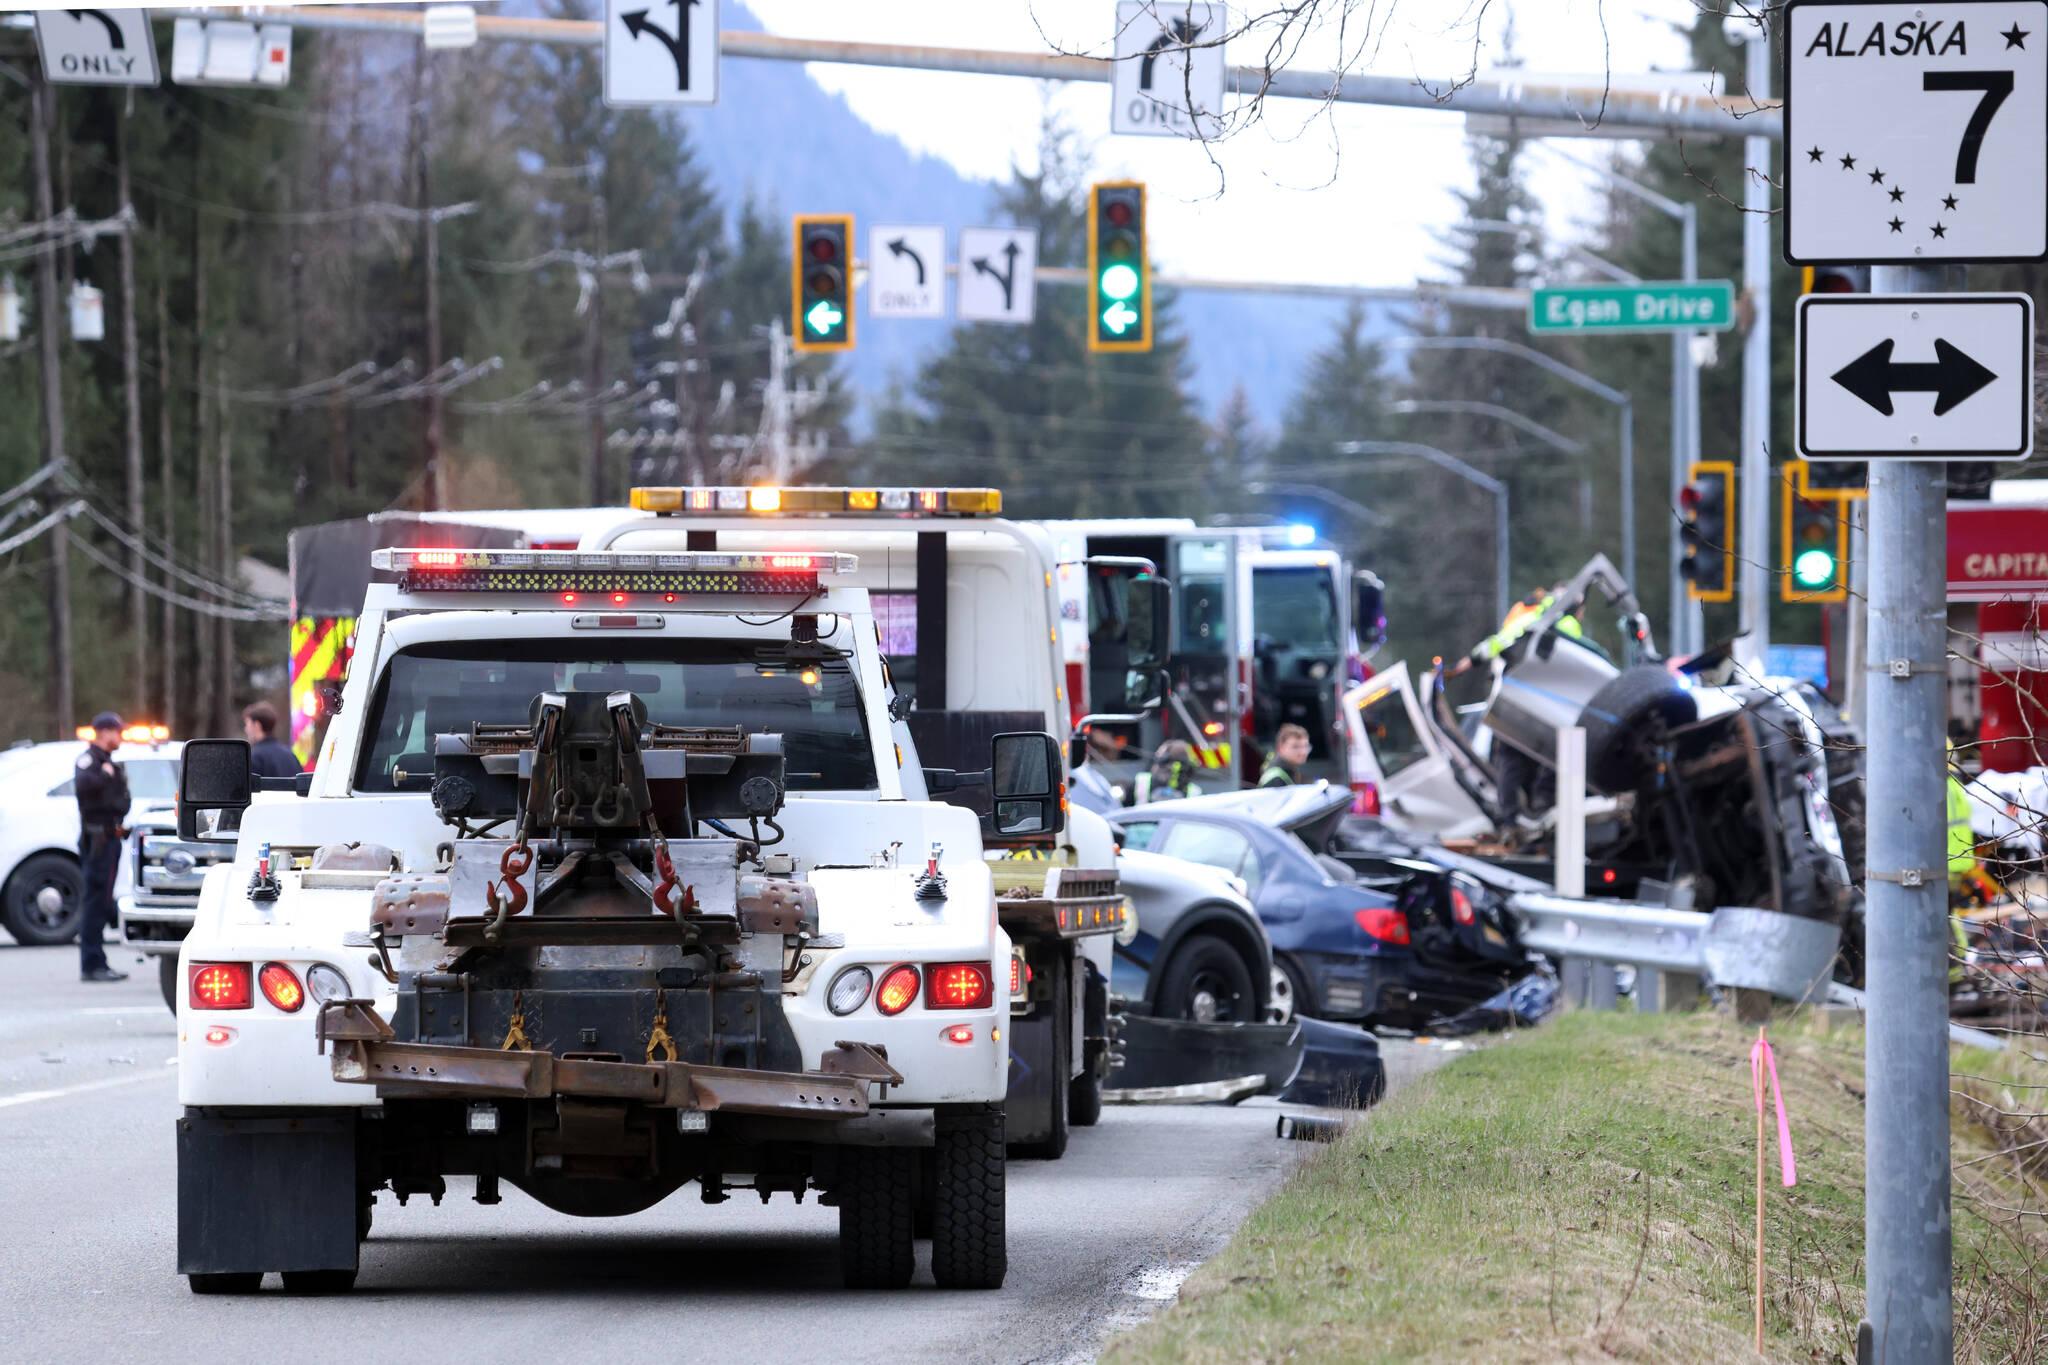 A line of vehicles responds to the scene of a fatal wreck at Egan Drive and Mendenhall Loop Road. The two-vehicle crash involved a car and a truck. Three people in critical condition were taken to the hospital after the wreck, and one person died at the scene, according to Juneau Police Department. (Ben Hohenstatt / Juneau Empire)